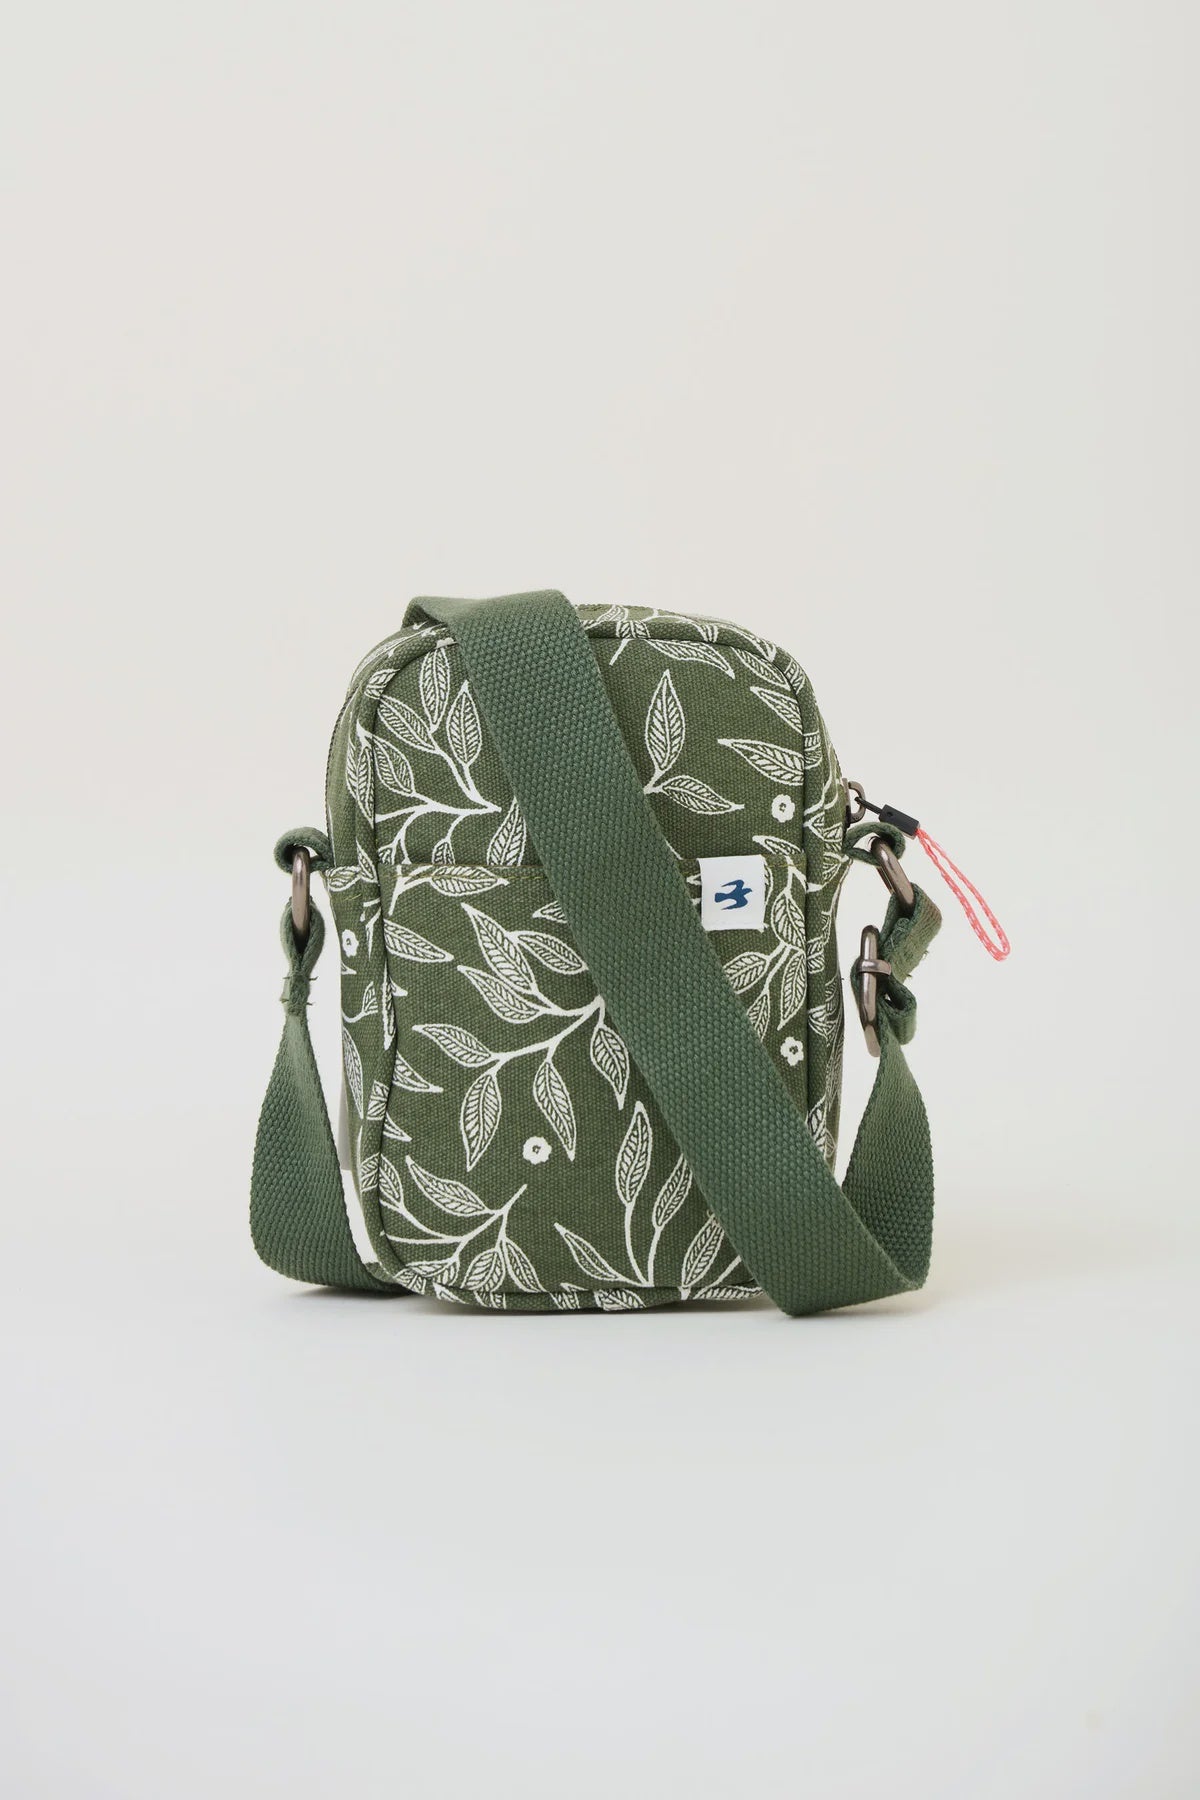 Small Pouch Cross Body Bag - Orchard Leaf